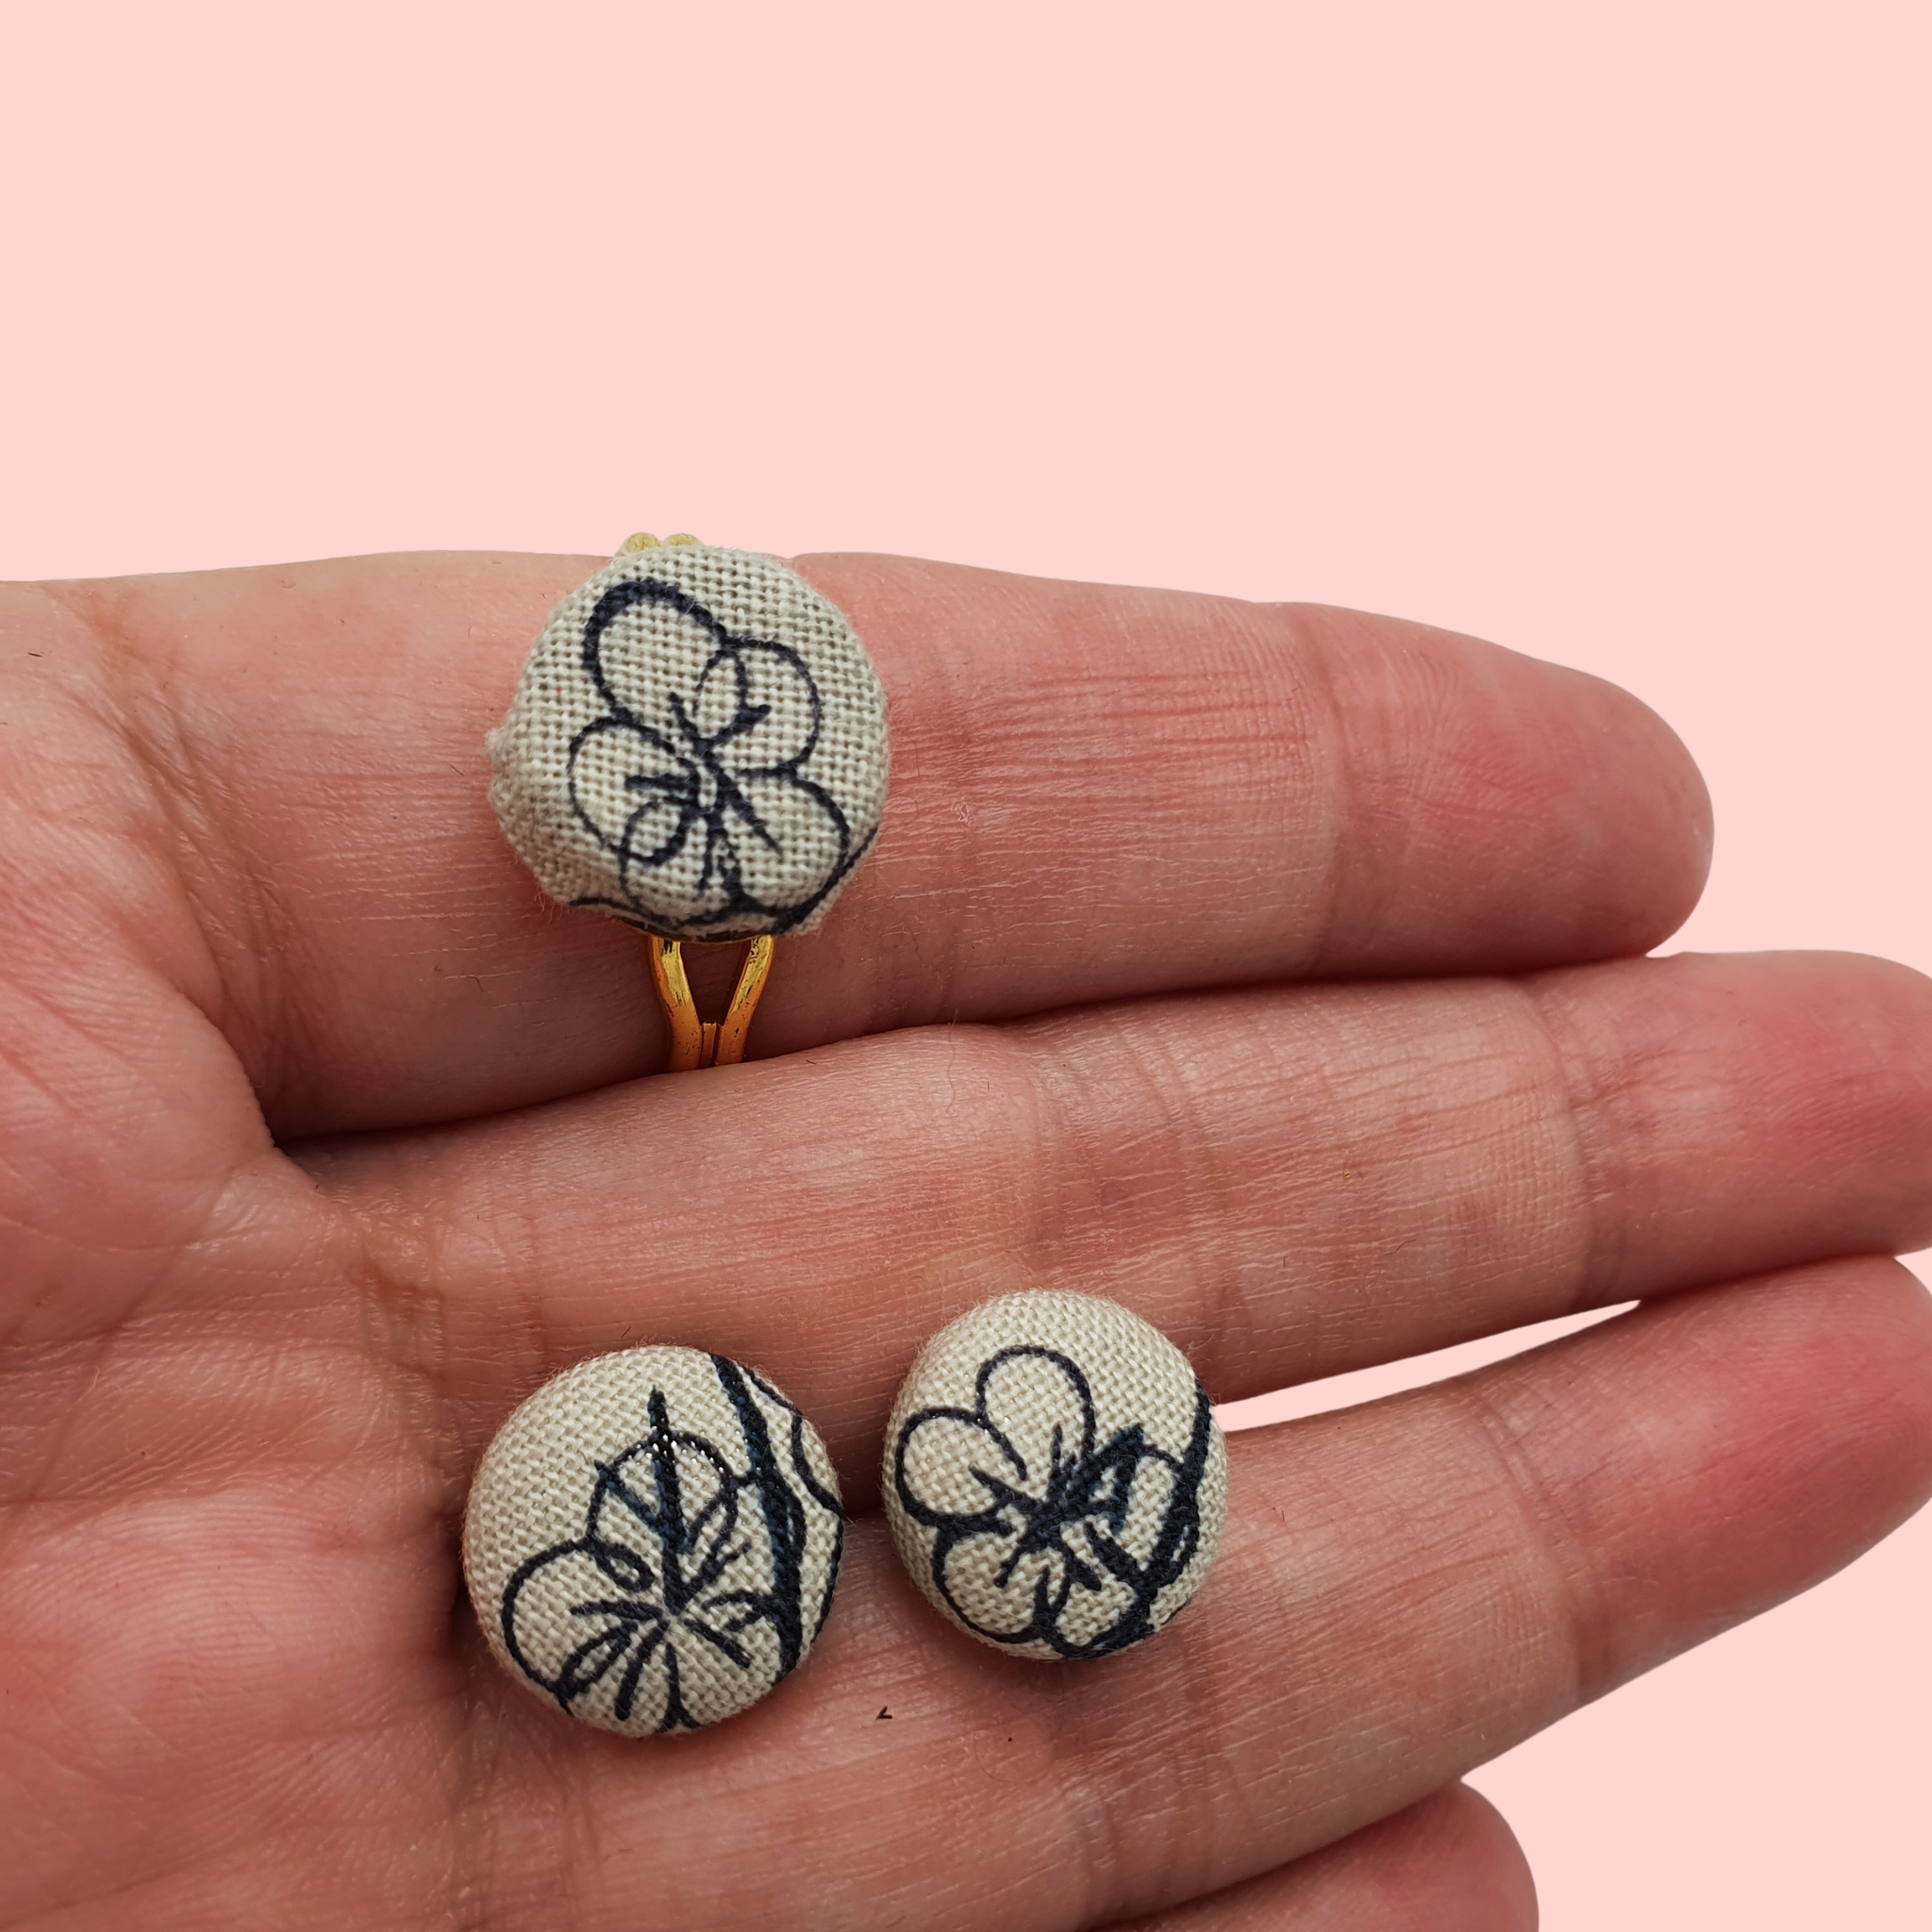 Flower Fabric button stud earrings, stainless Steel post and back. gift box included